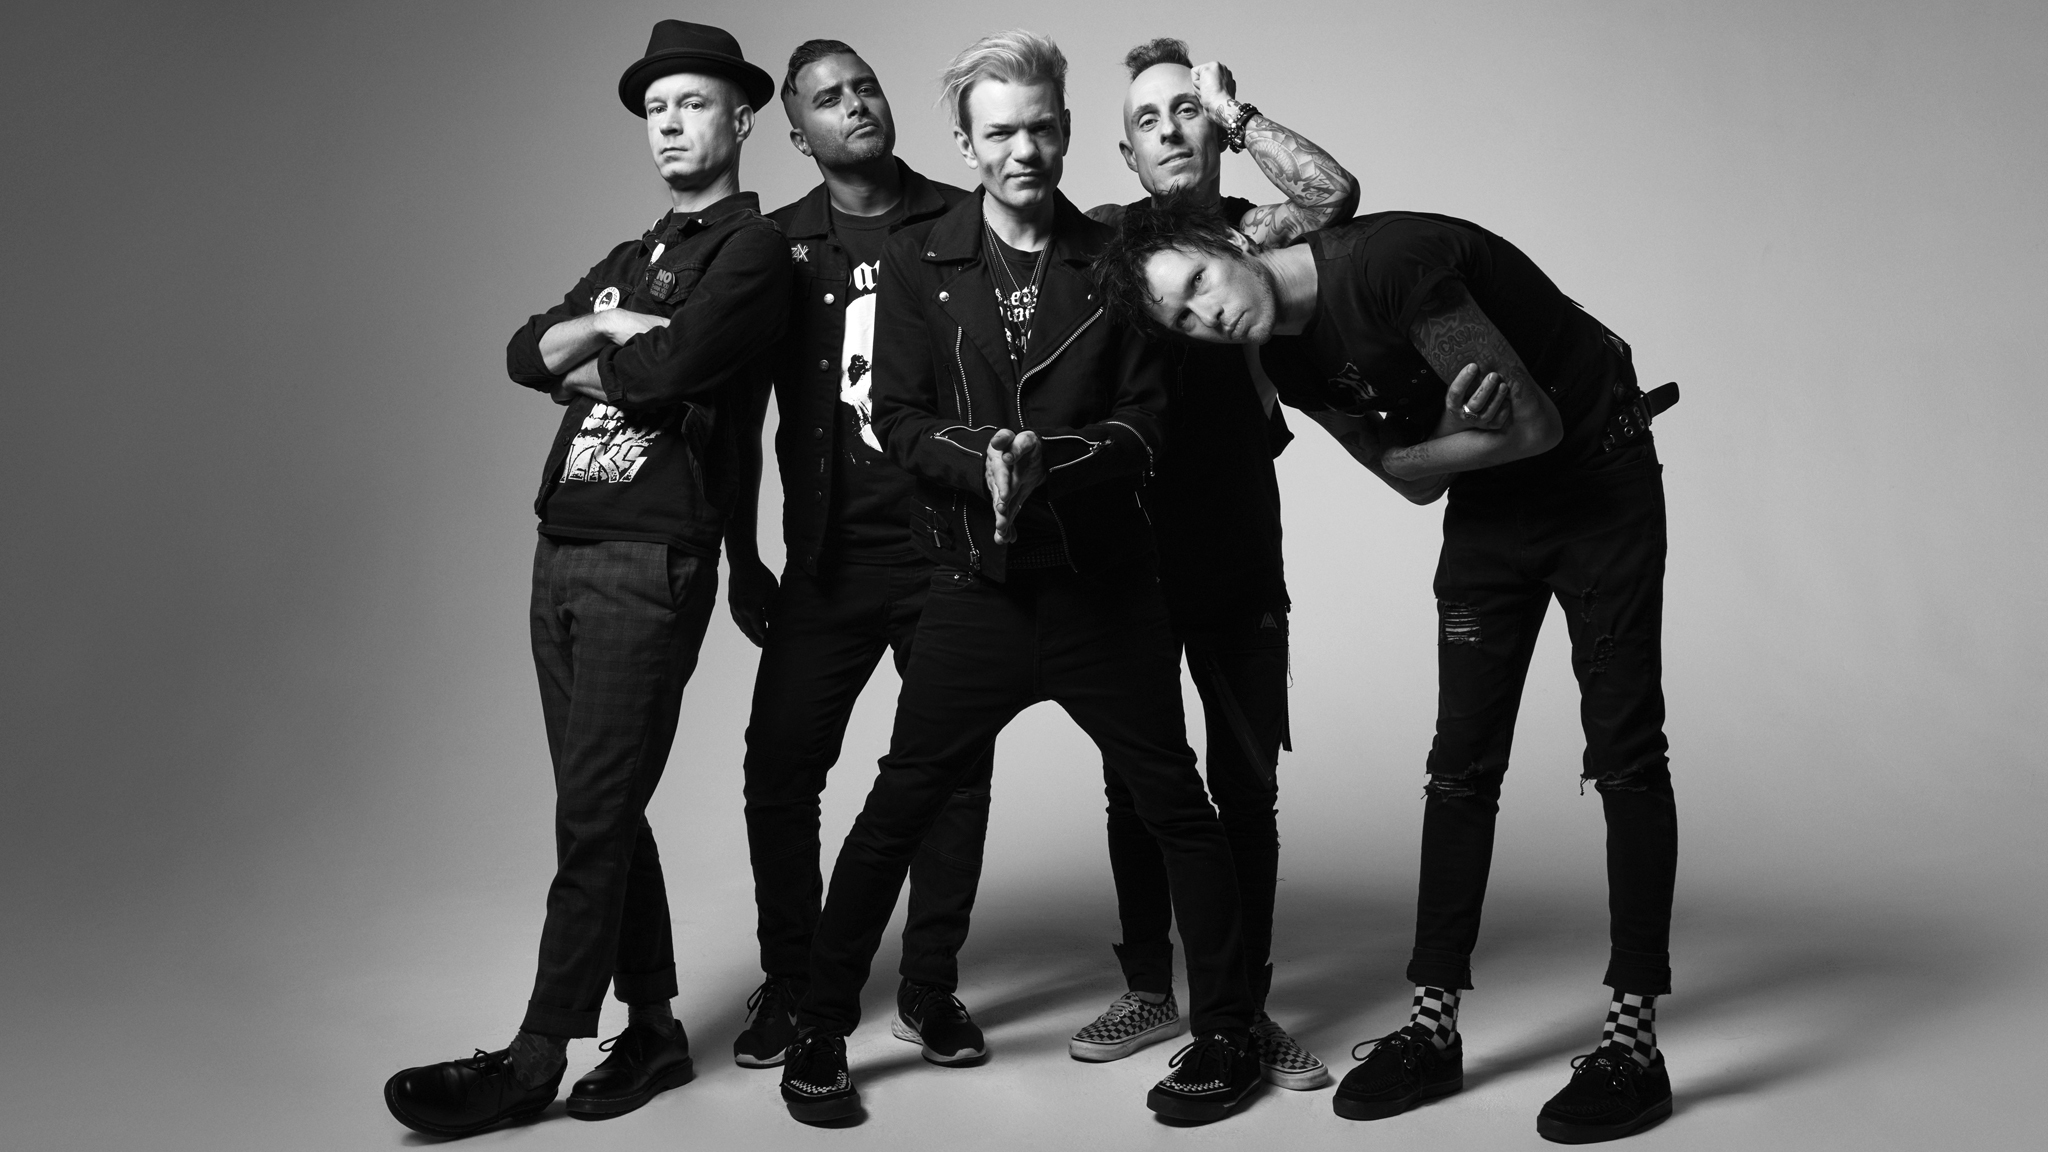 Sum 41 Announces Final Tour Dates and Last-Ever Show Ahead of